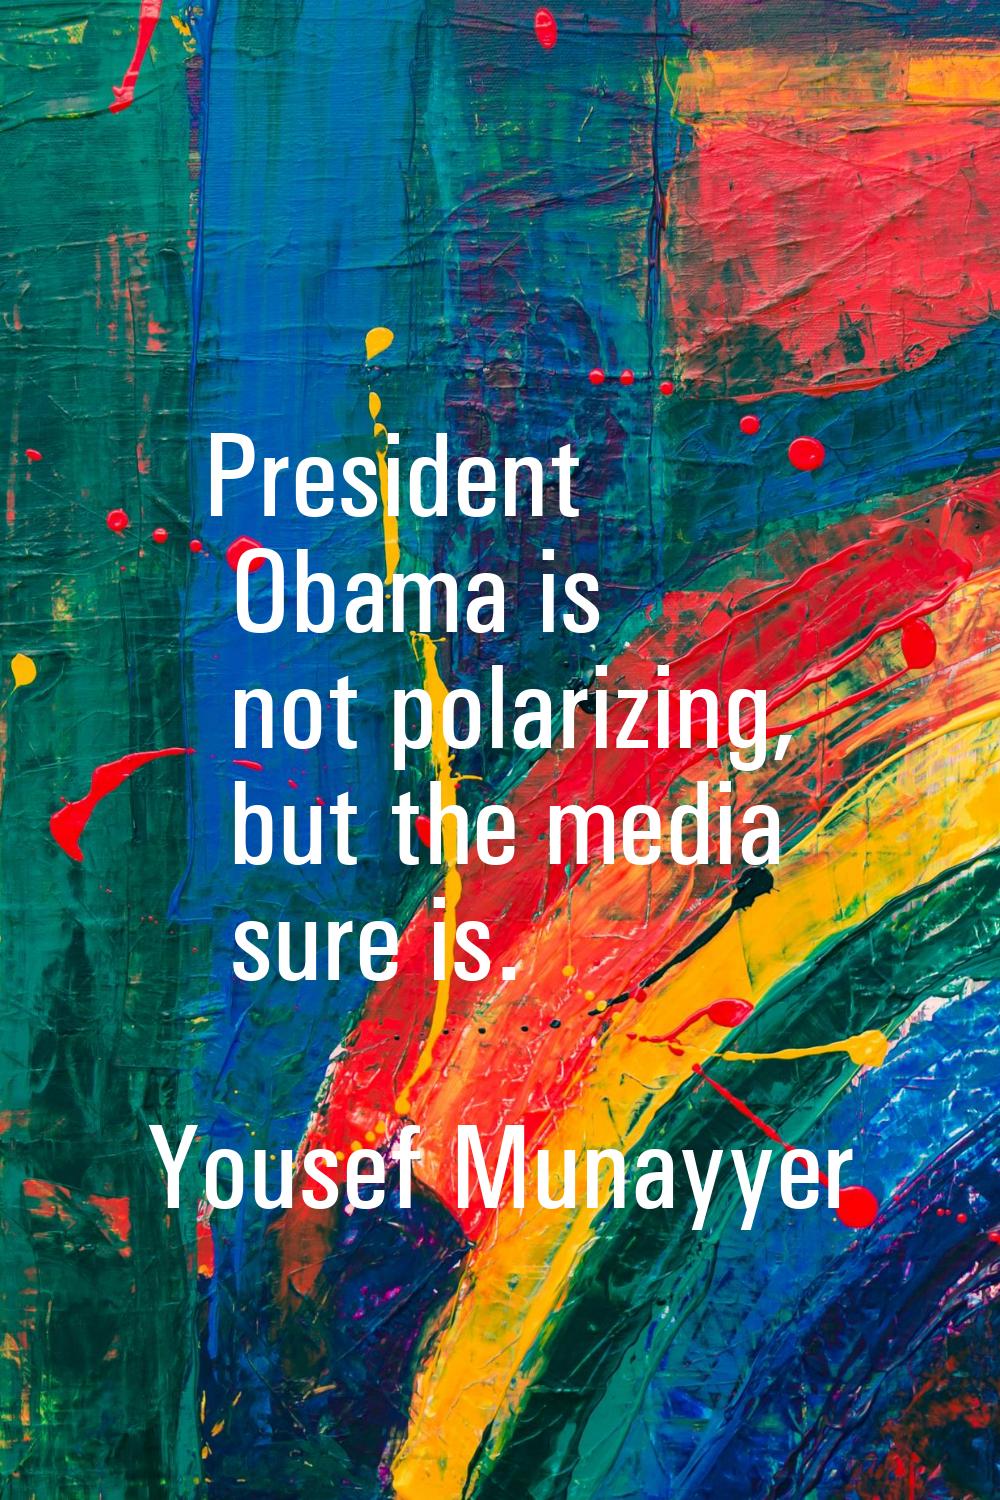 President Obama is not polarizing, but the media sure is.